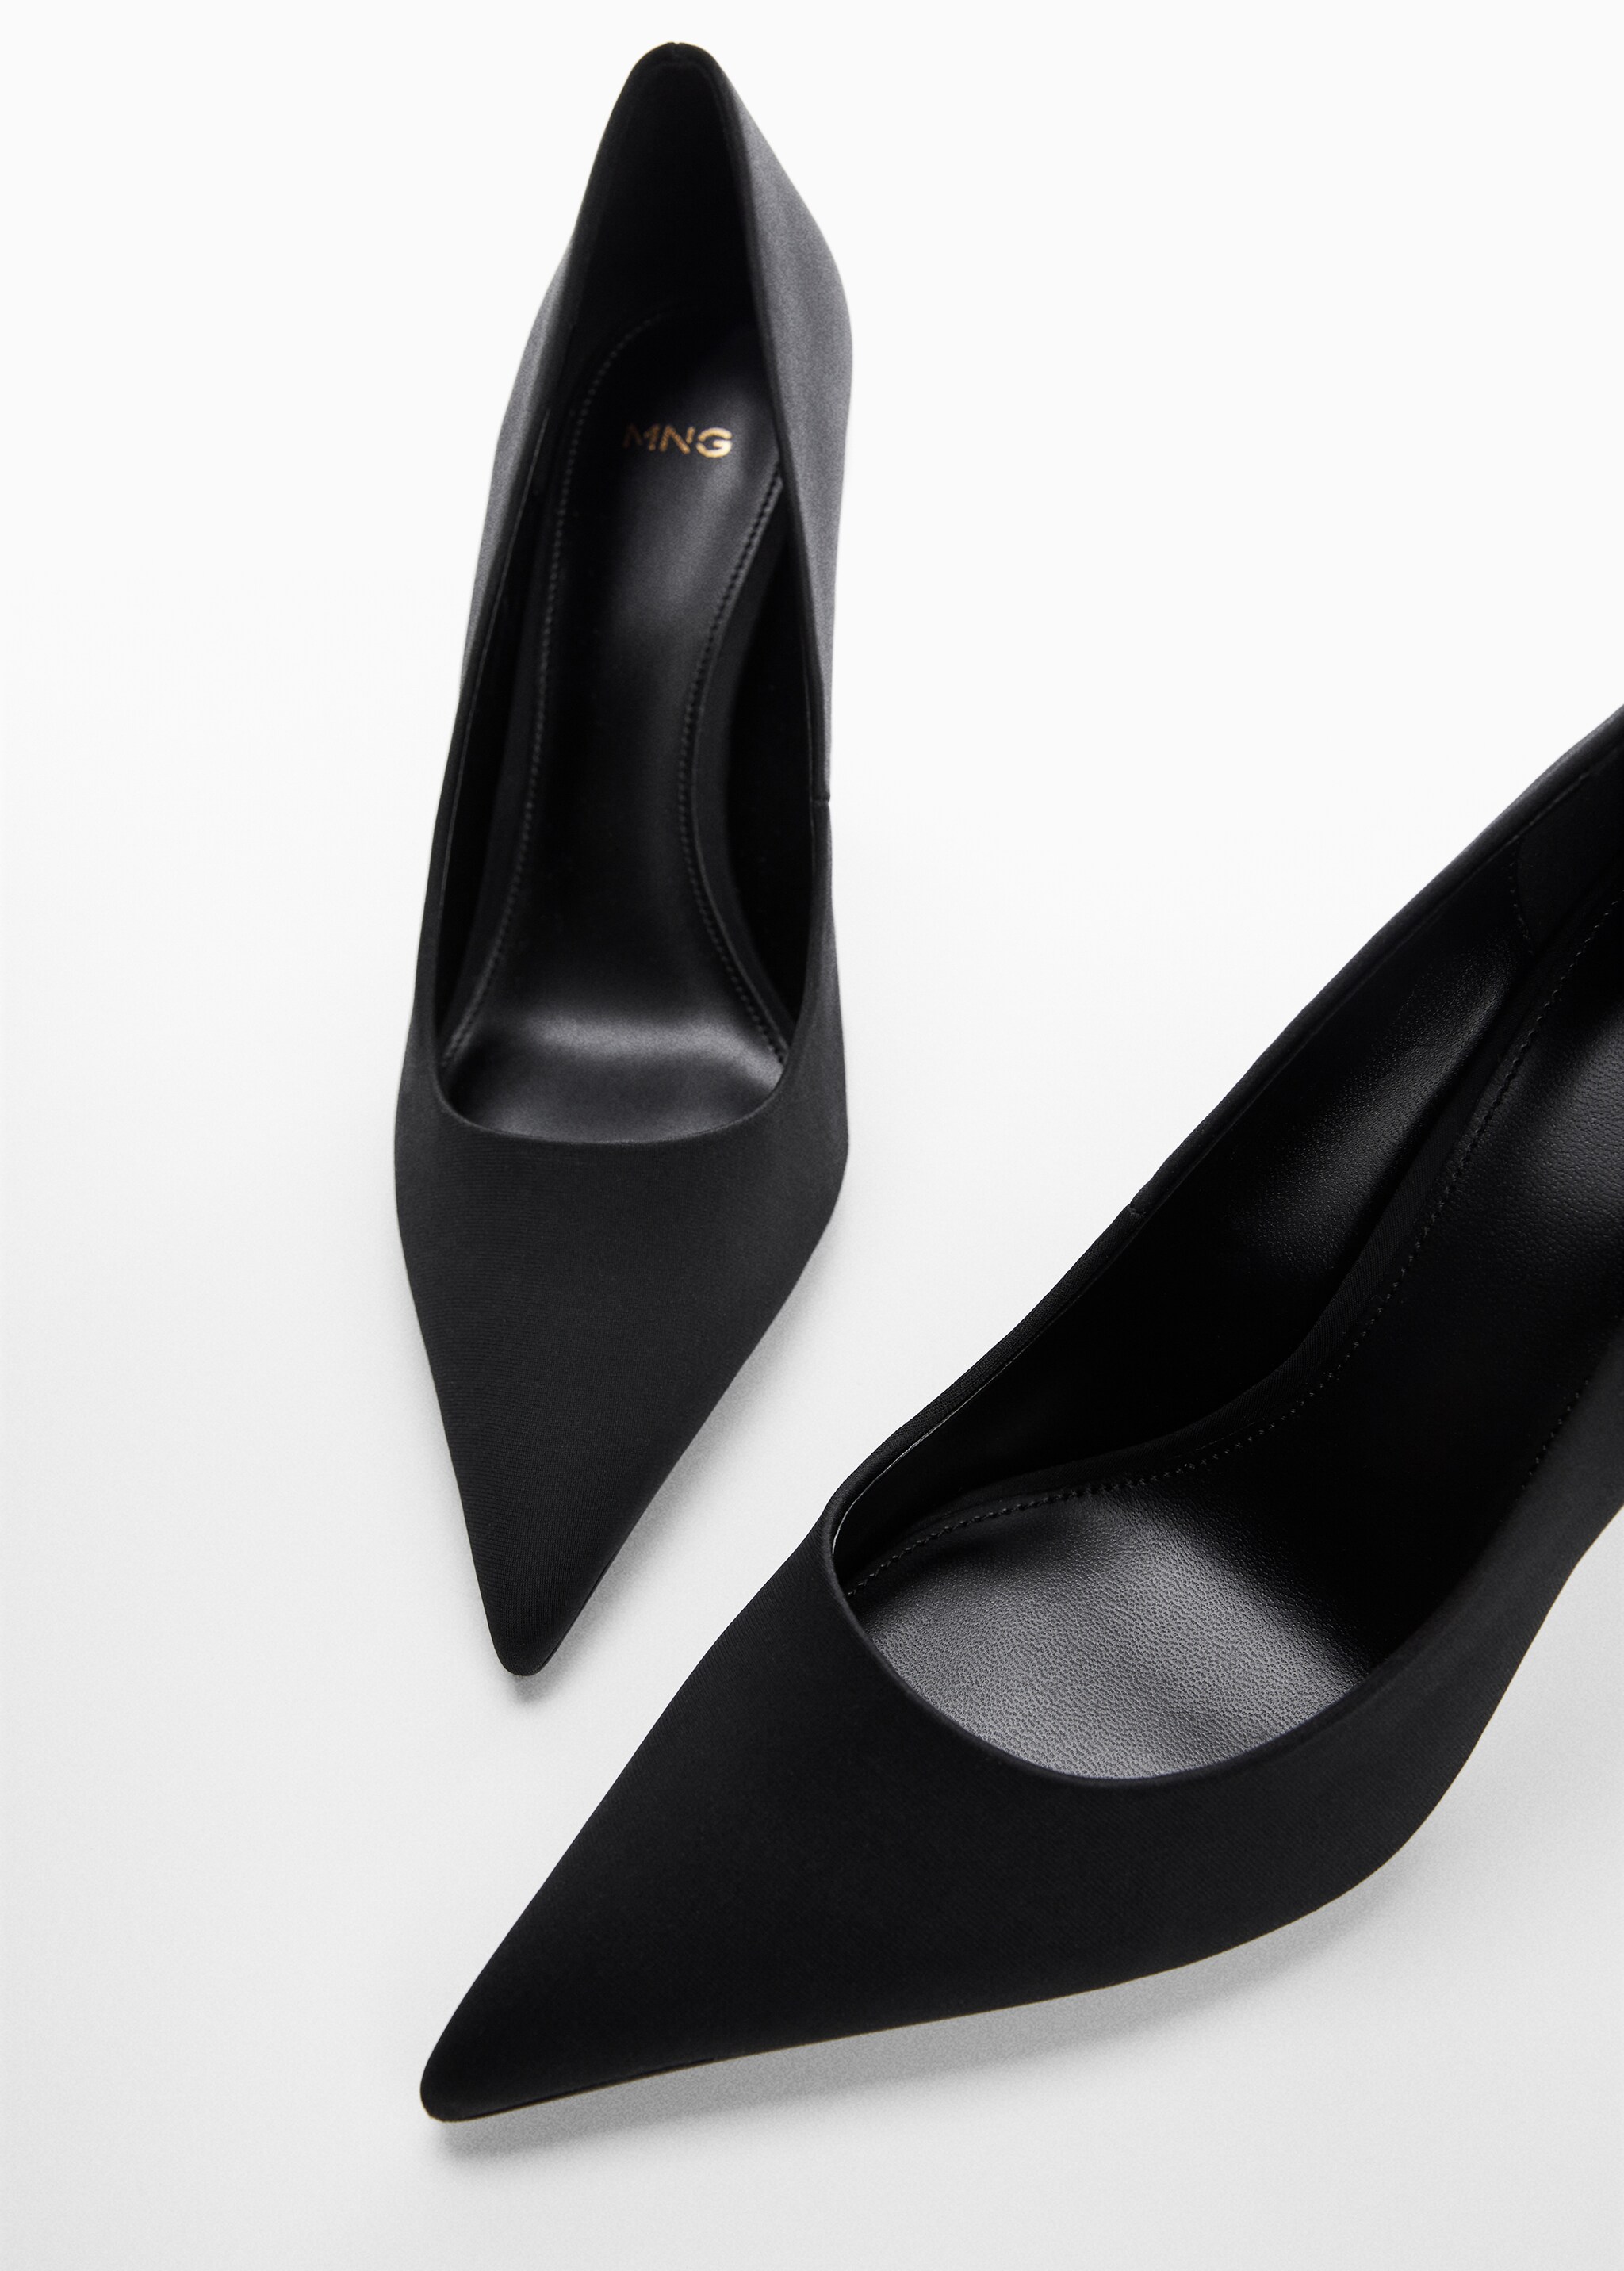 Pointed toe heel shoes - Details of the article 1